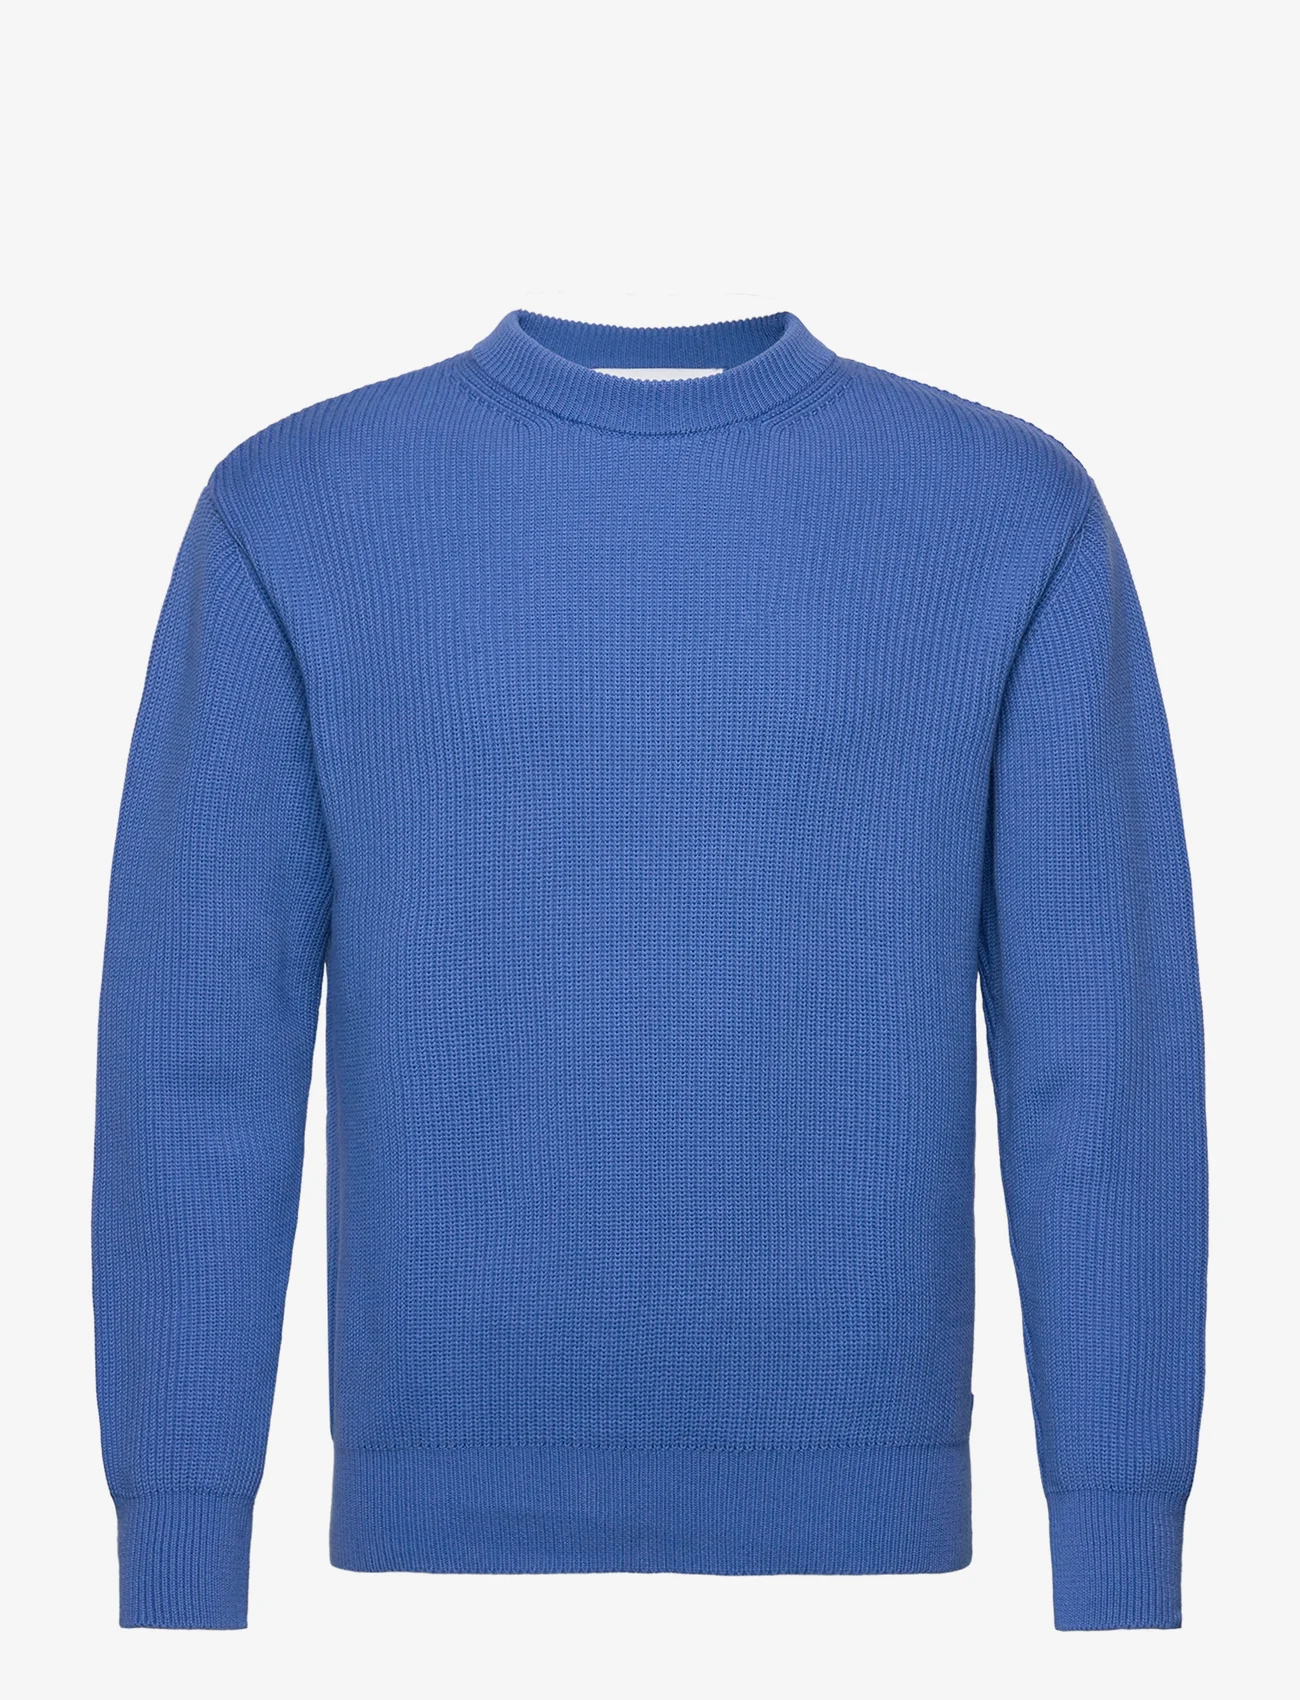 Garment Project - Round Neck Knit - Blue - nordic style - blue - 0